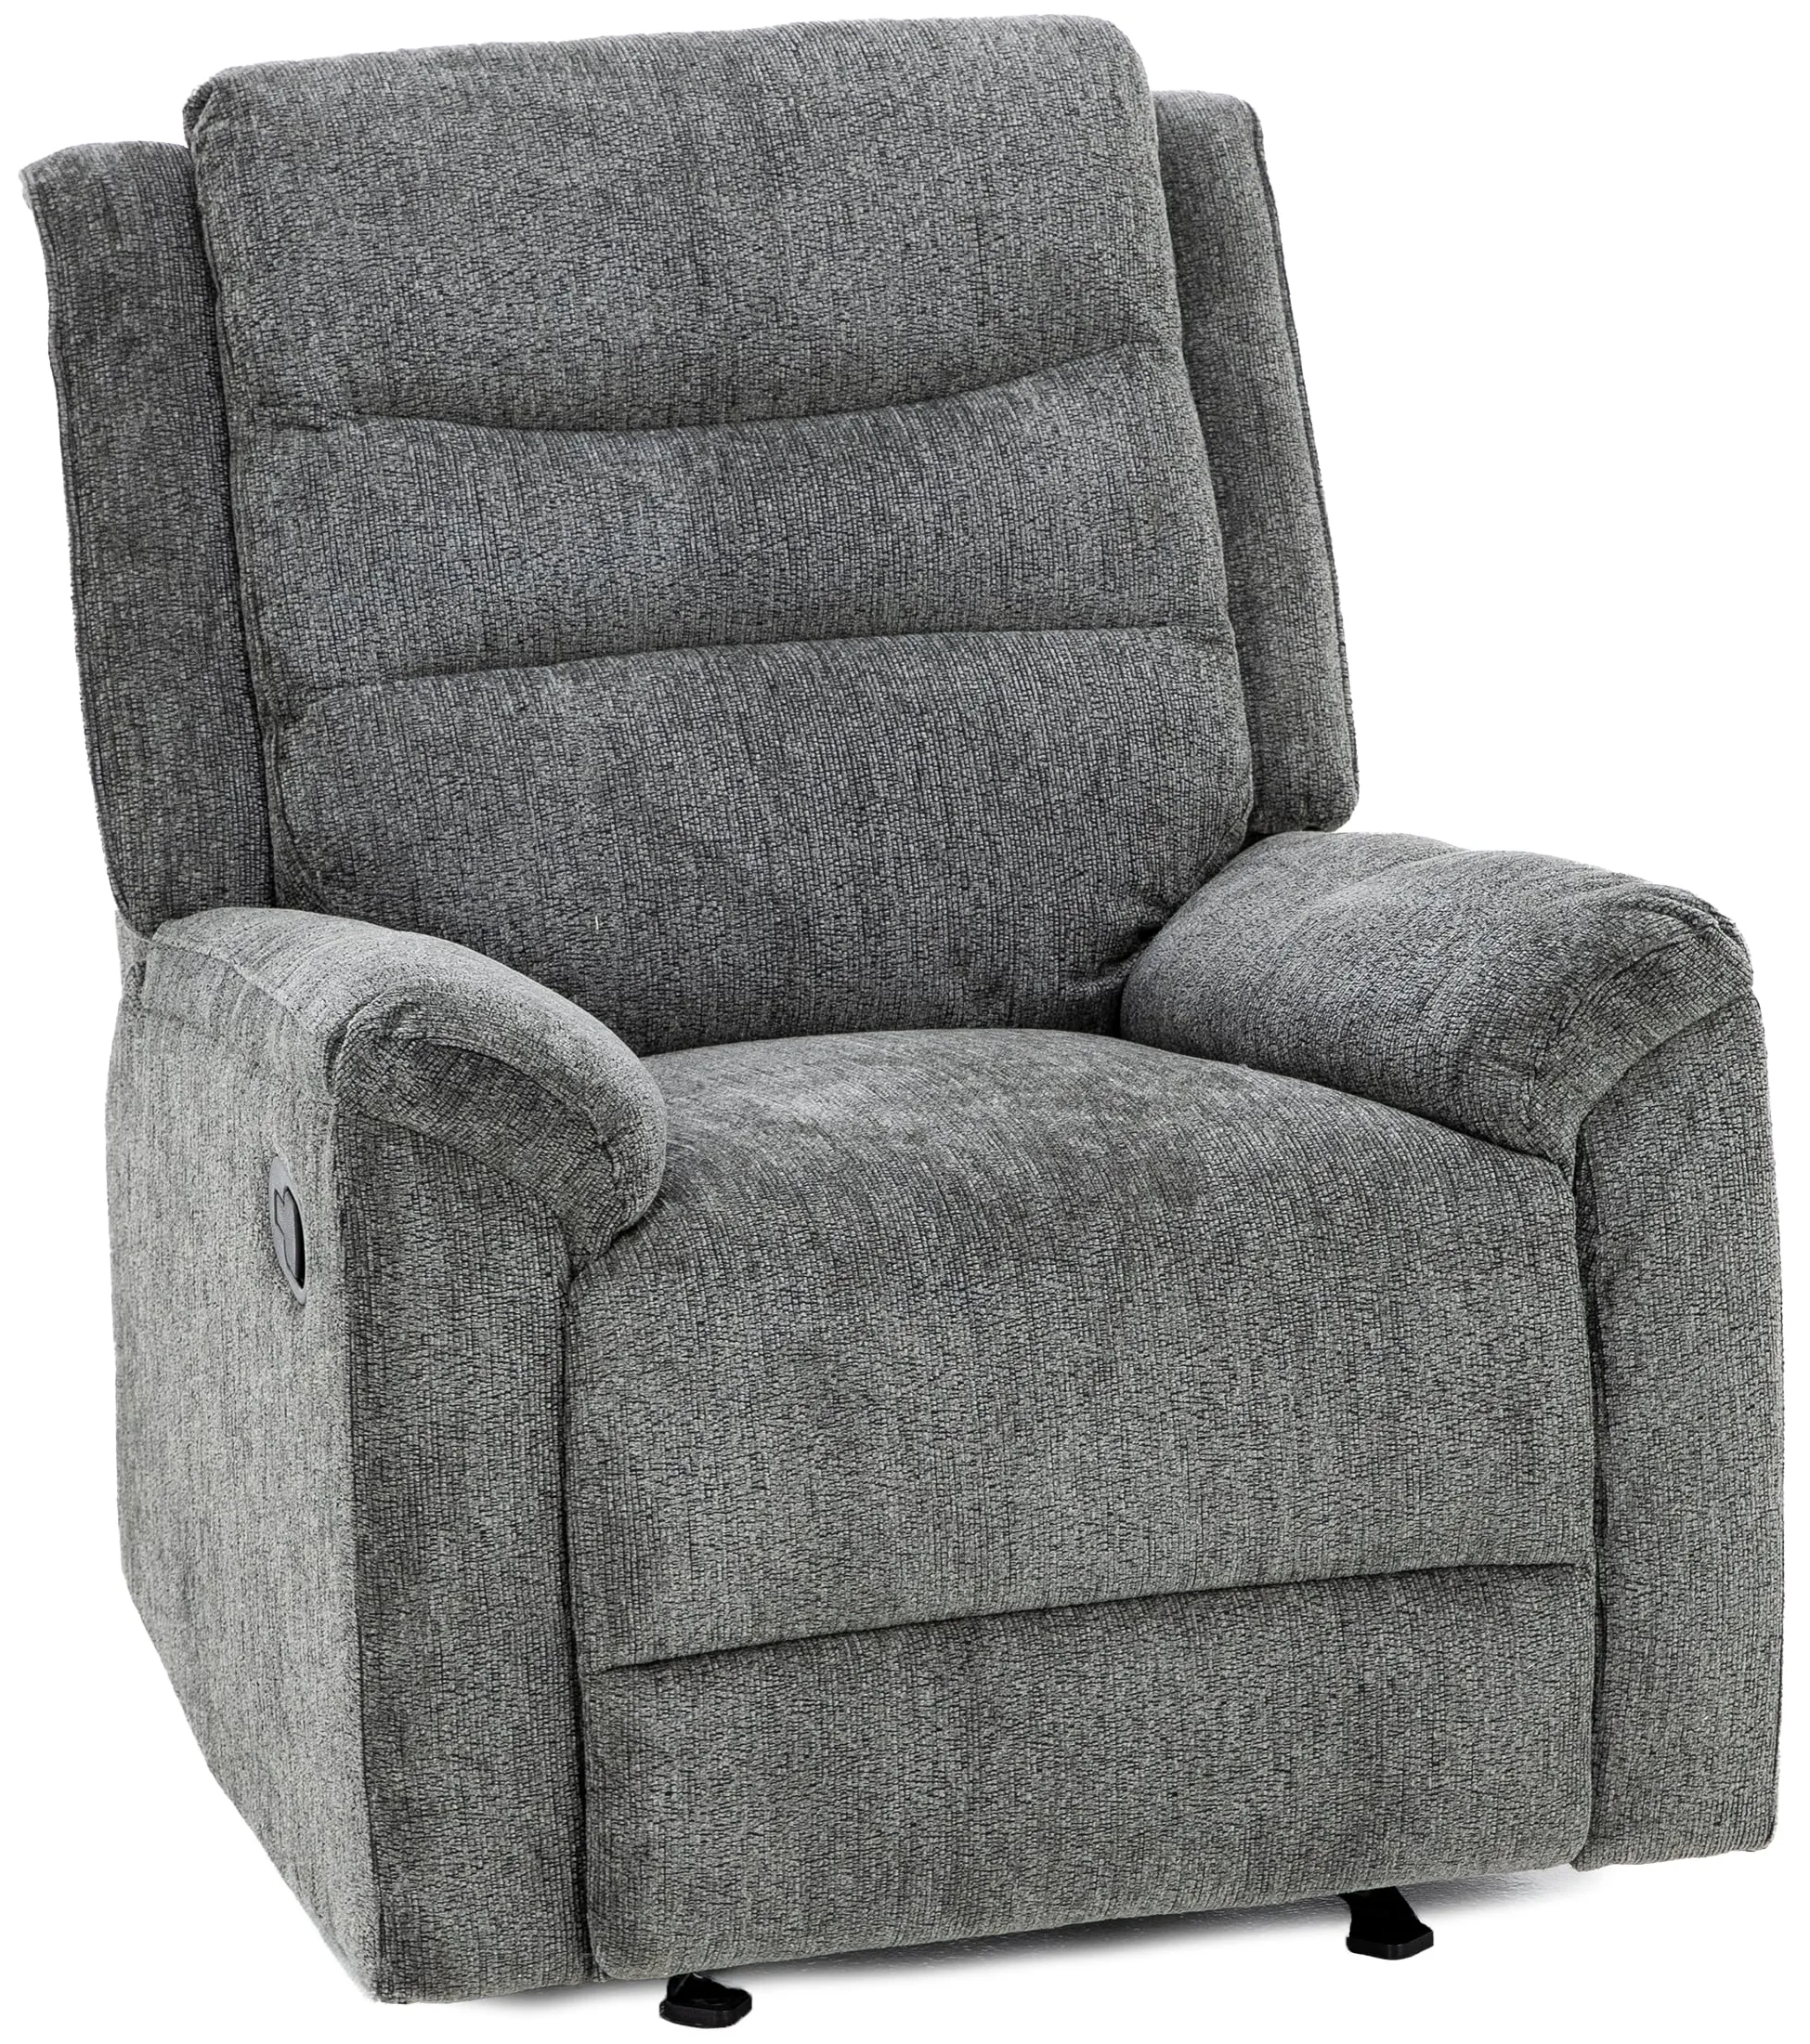 Abbey Glider Recliner in Charcoal